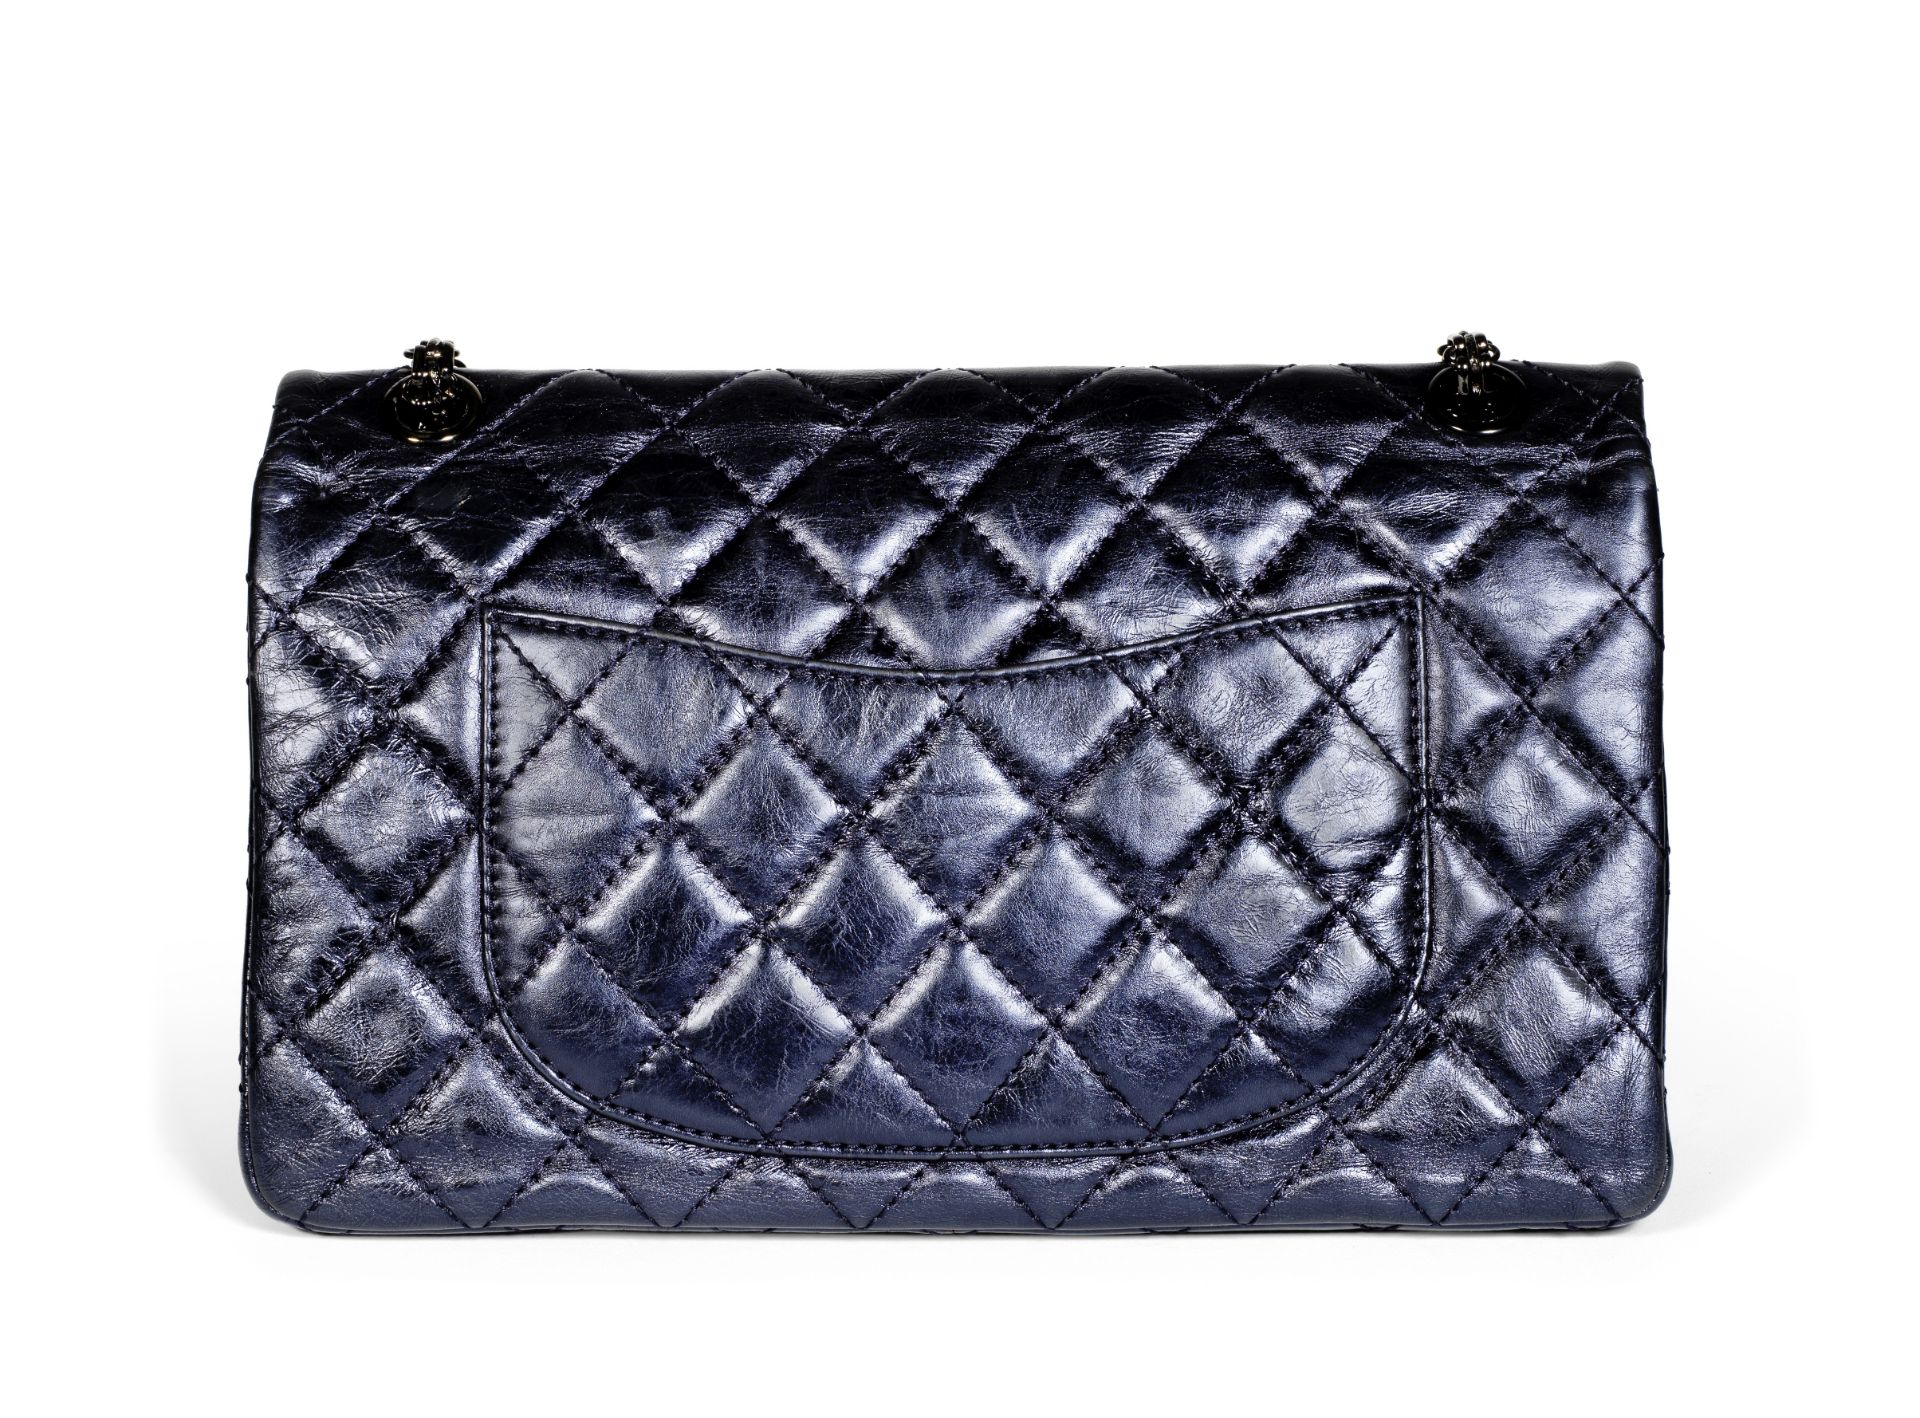 Metallic Blue Reissue 277 Double Flap Bag, Chanel, c. 2008-09, (Includes serial sticker and authe... - Image 2 of 2